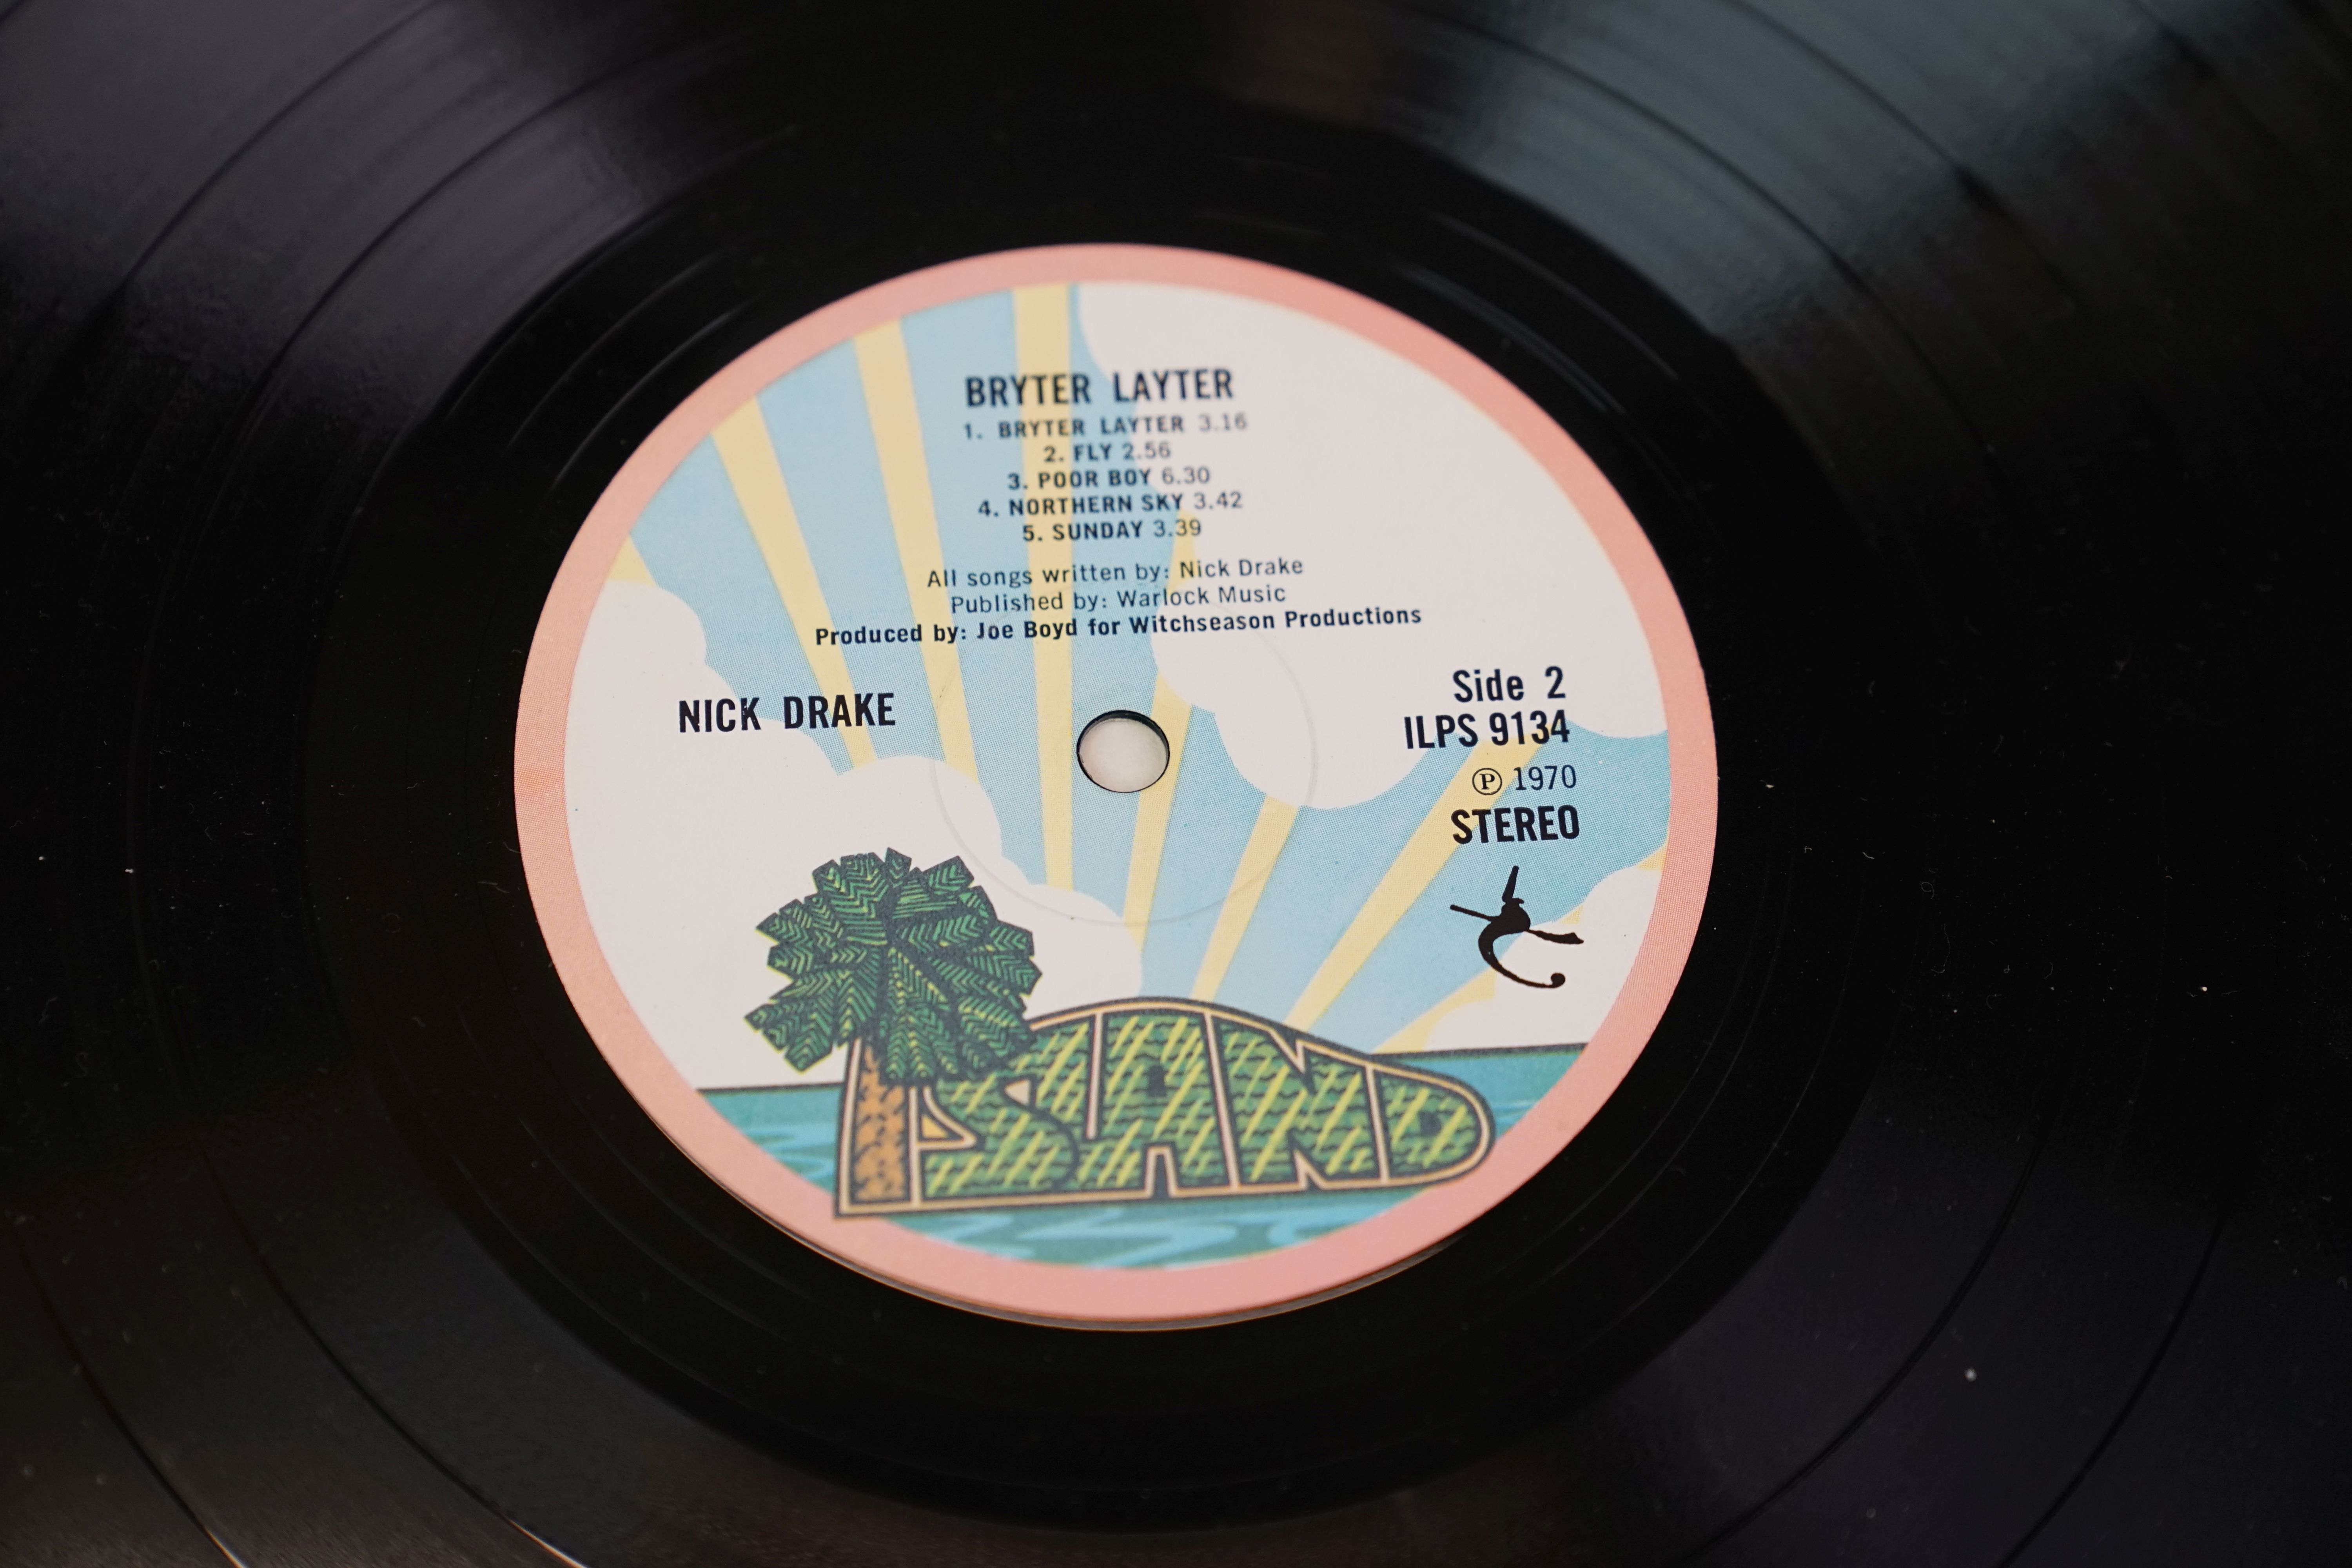 Vinyl - Nick Drake Bryter Later (ILPS 9134) first press with pink rim Island label, Stereo on label, - Image 5 of 6